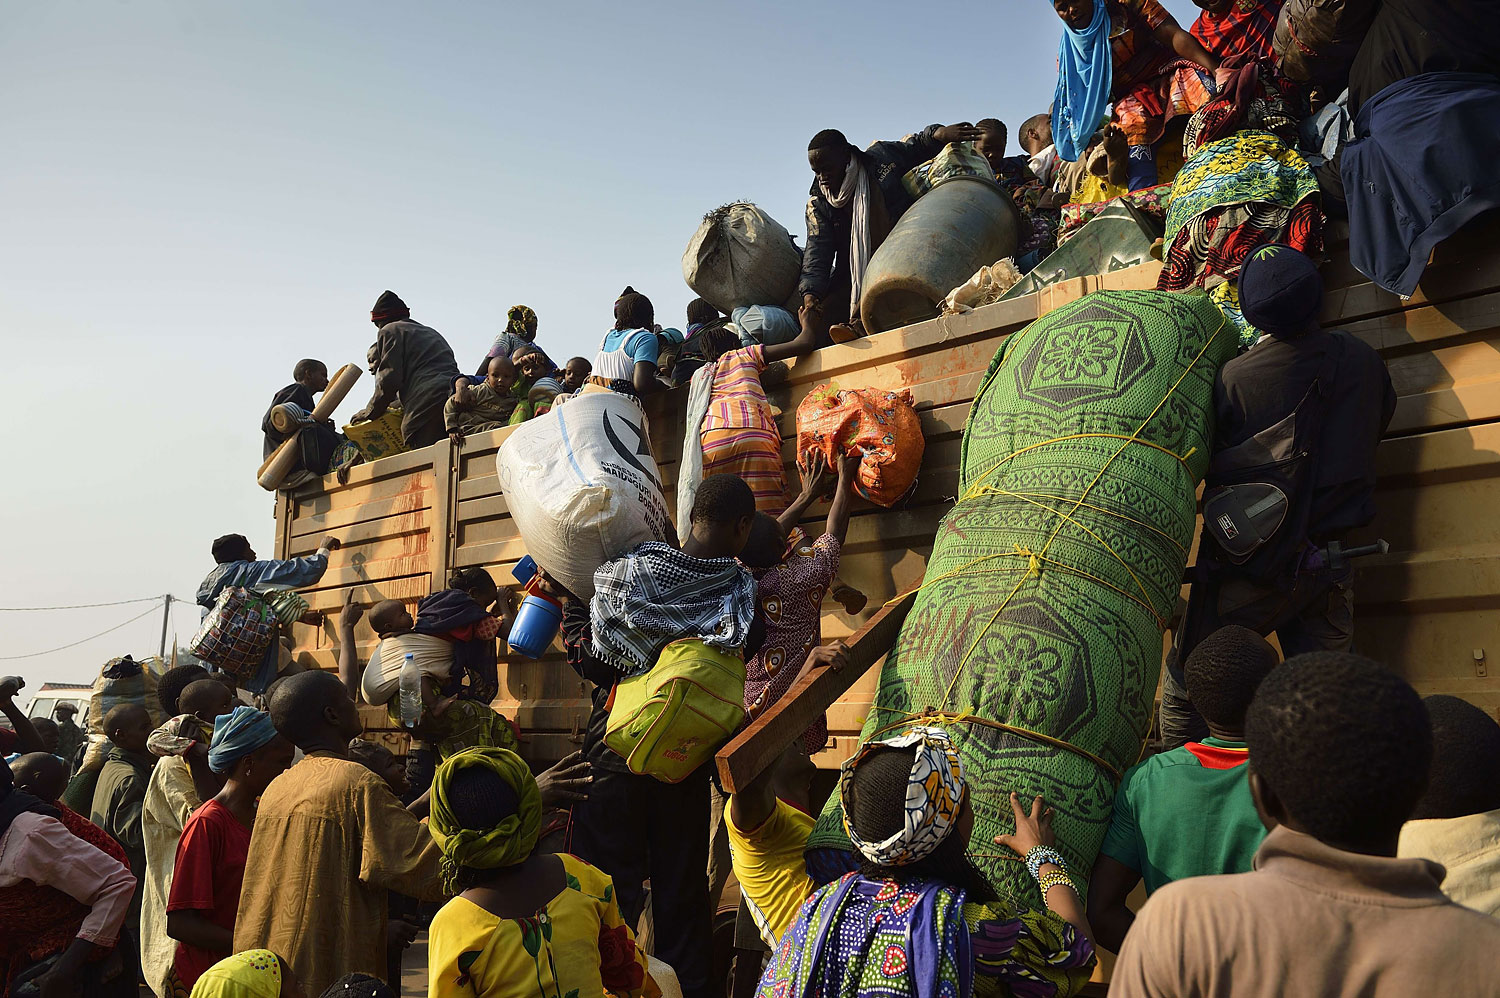 Chadian civilians climb on a military chadian truck to go back to Chad on Jan. 15, 2014, in the PK12 district of Bangui. (Eric Feferberg&mdash;AFP/Getty Images)